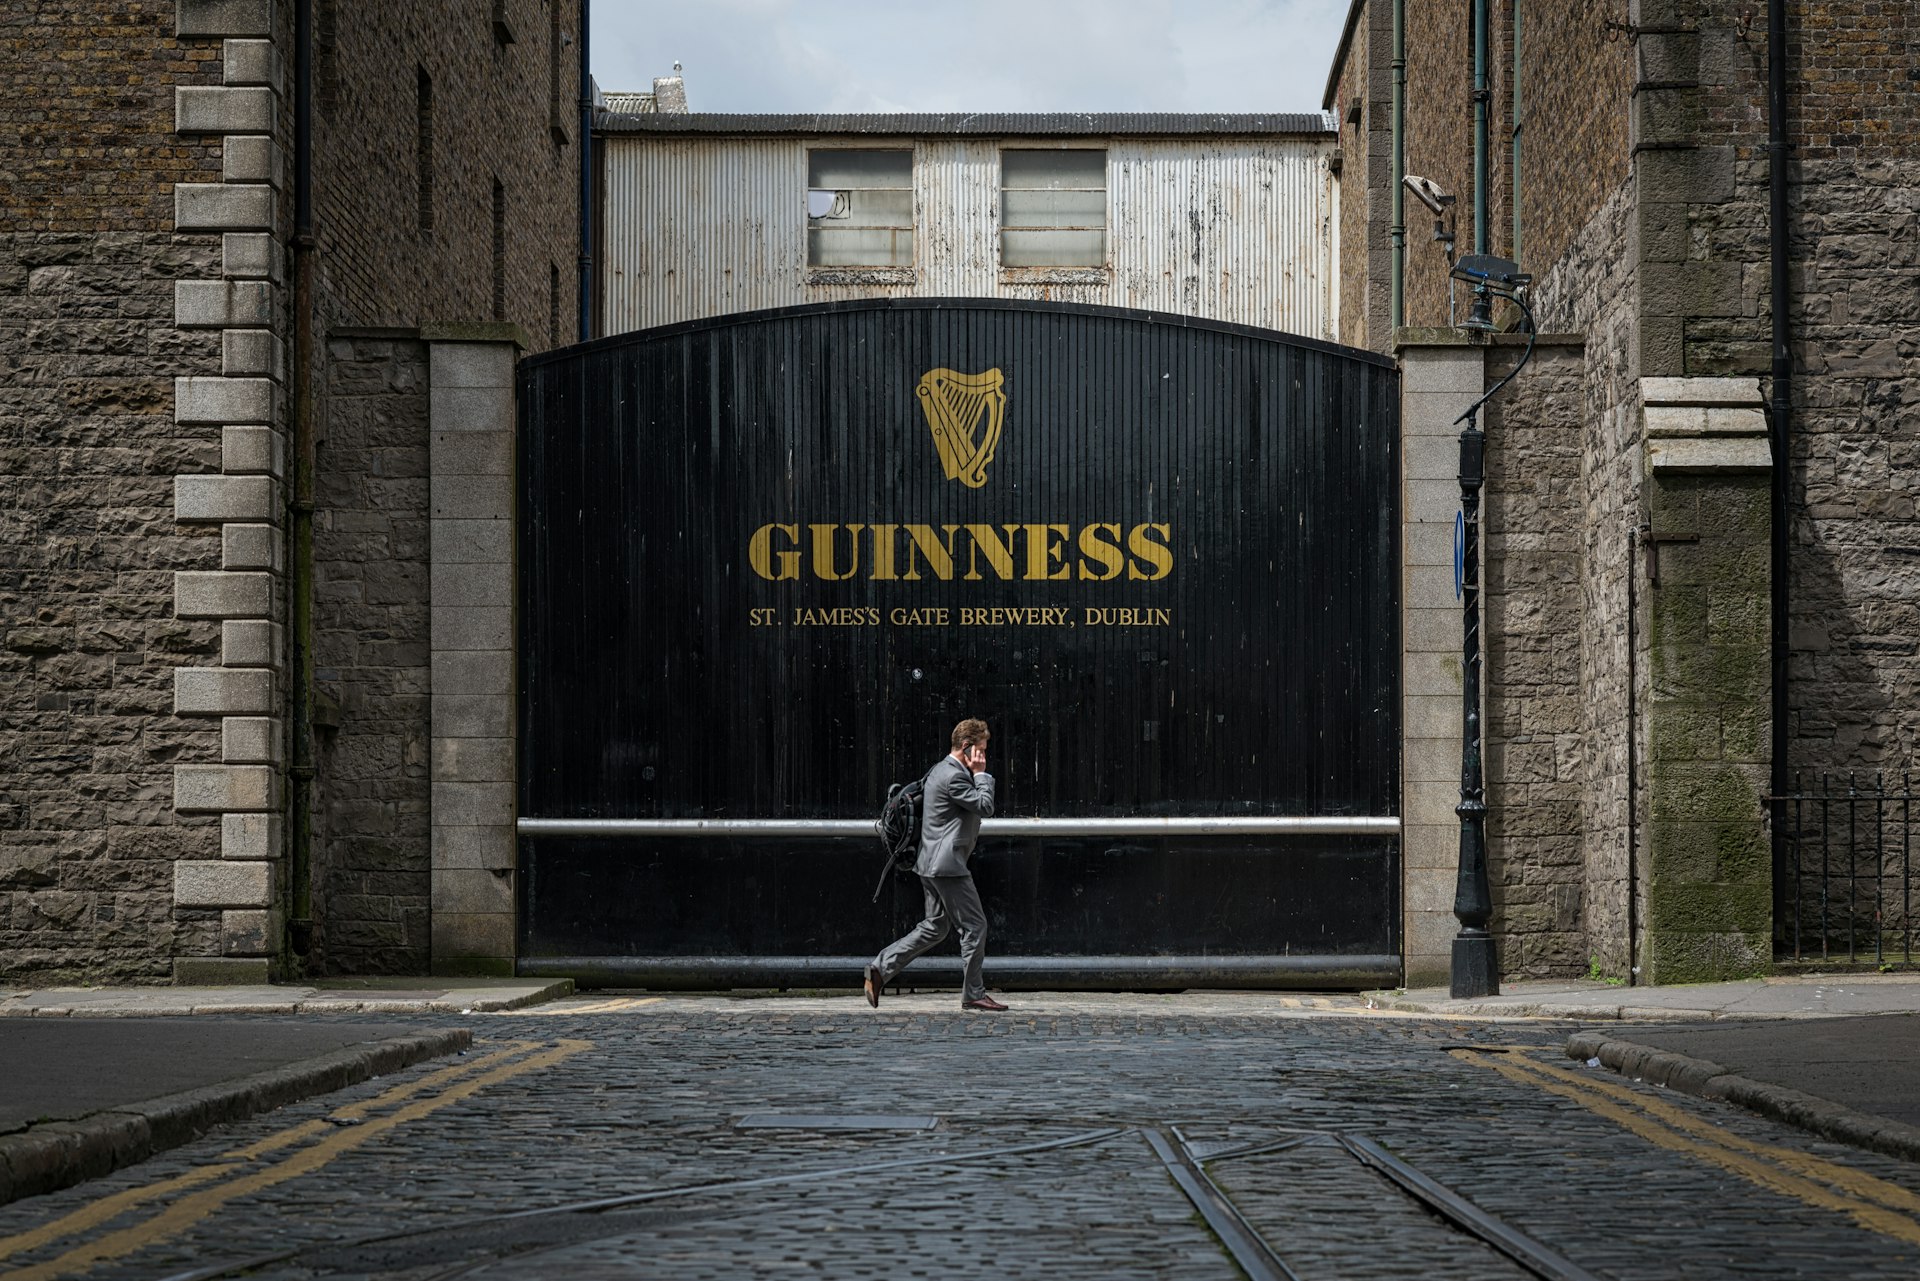 A man walks past the iconic gates to the Guinness brewery in Dublin